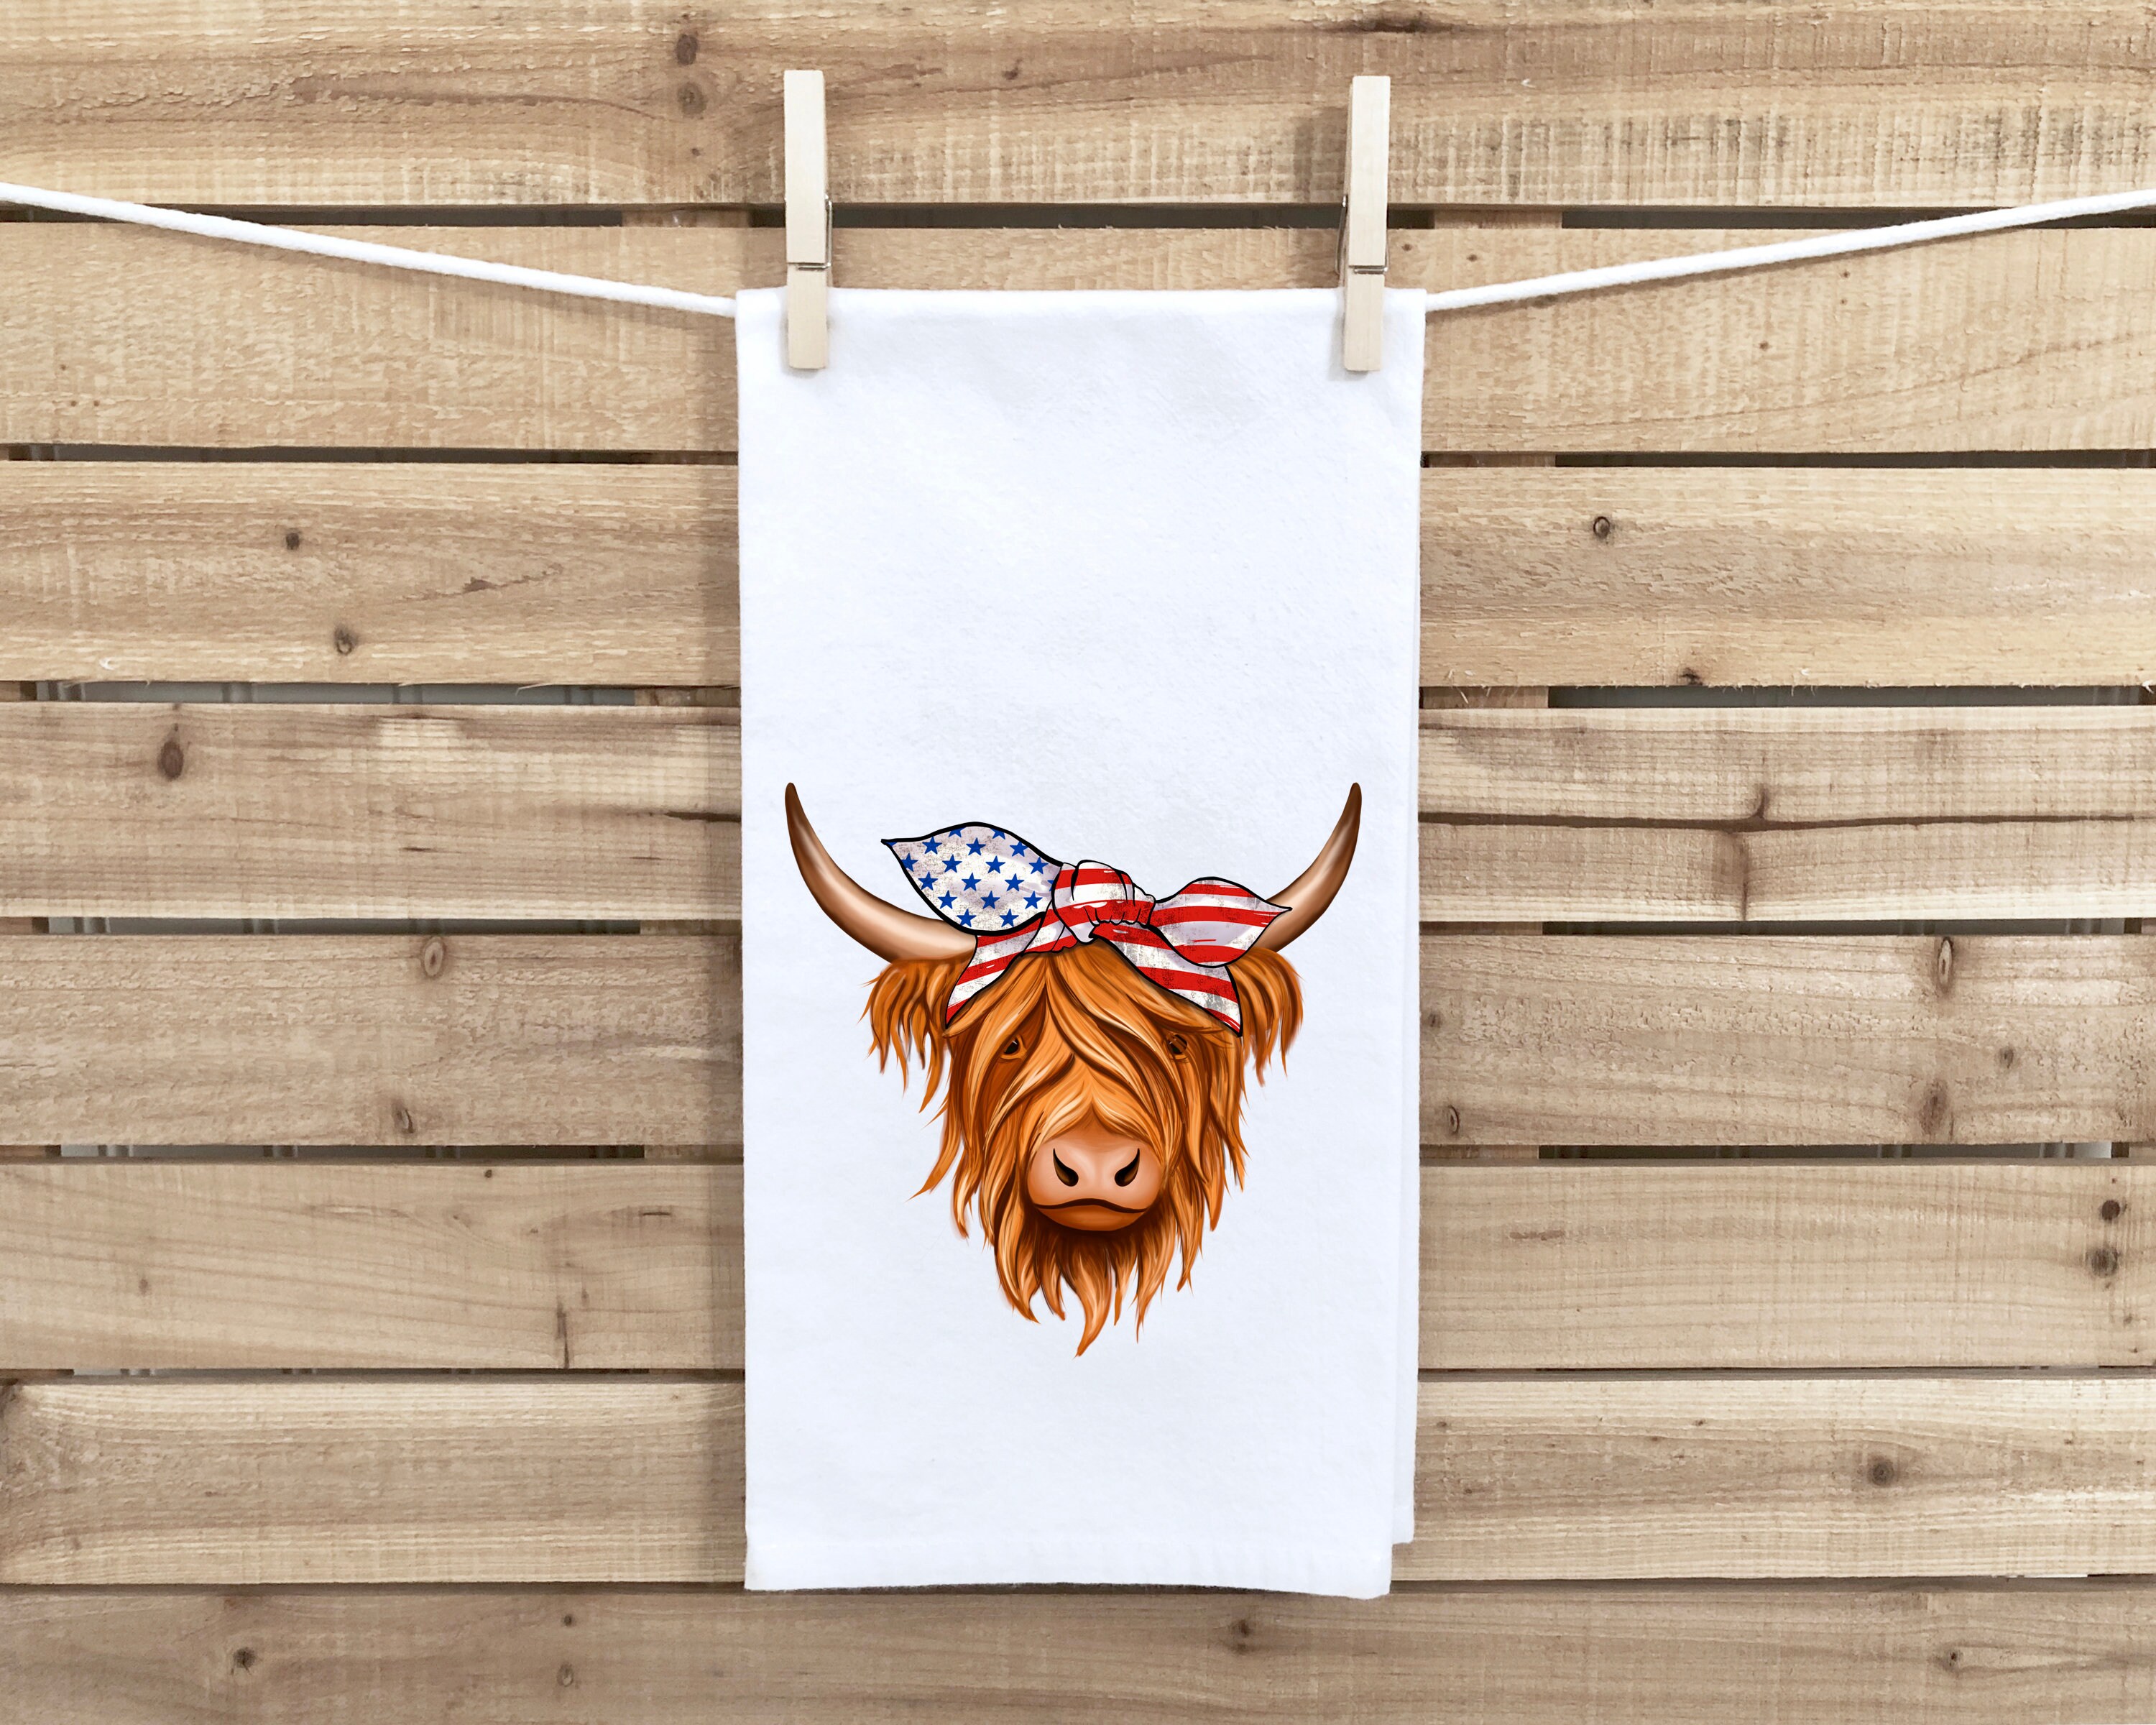 novelty kitchen towel, cotton dish towel highland cow funny striped tea  towel gift